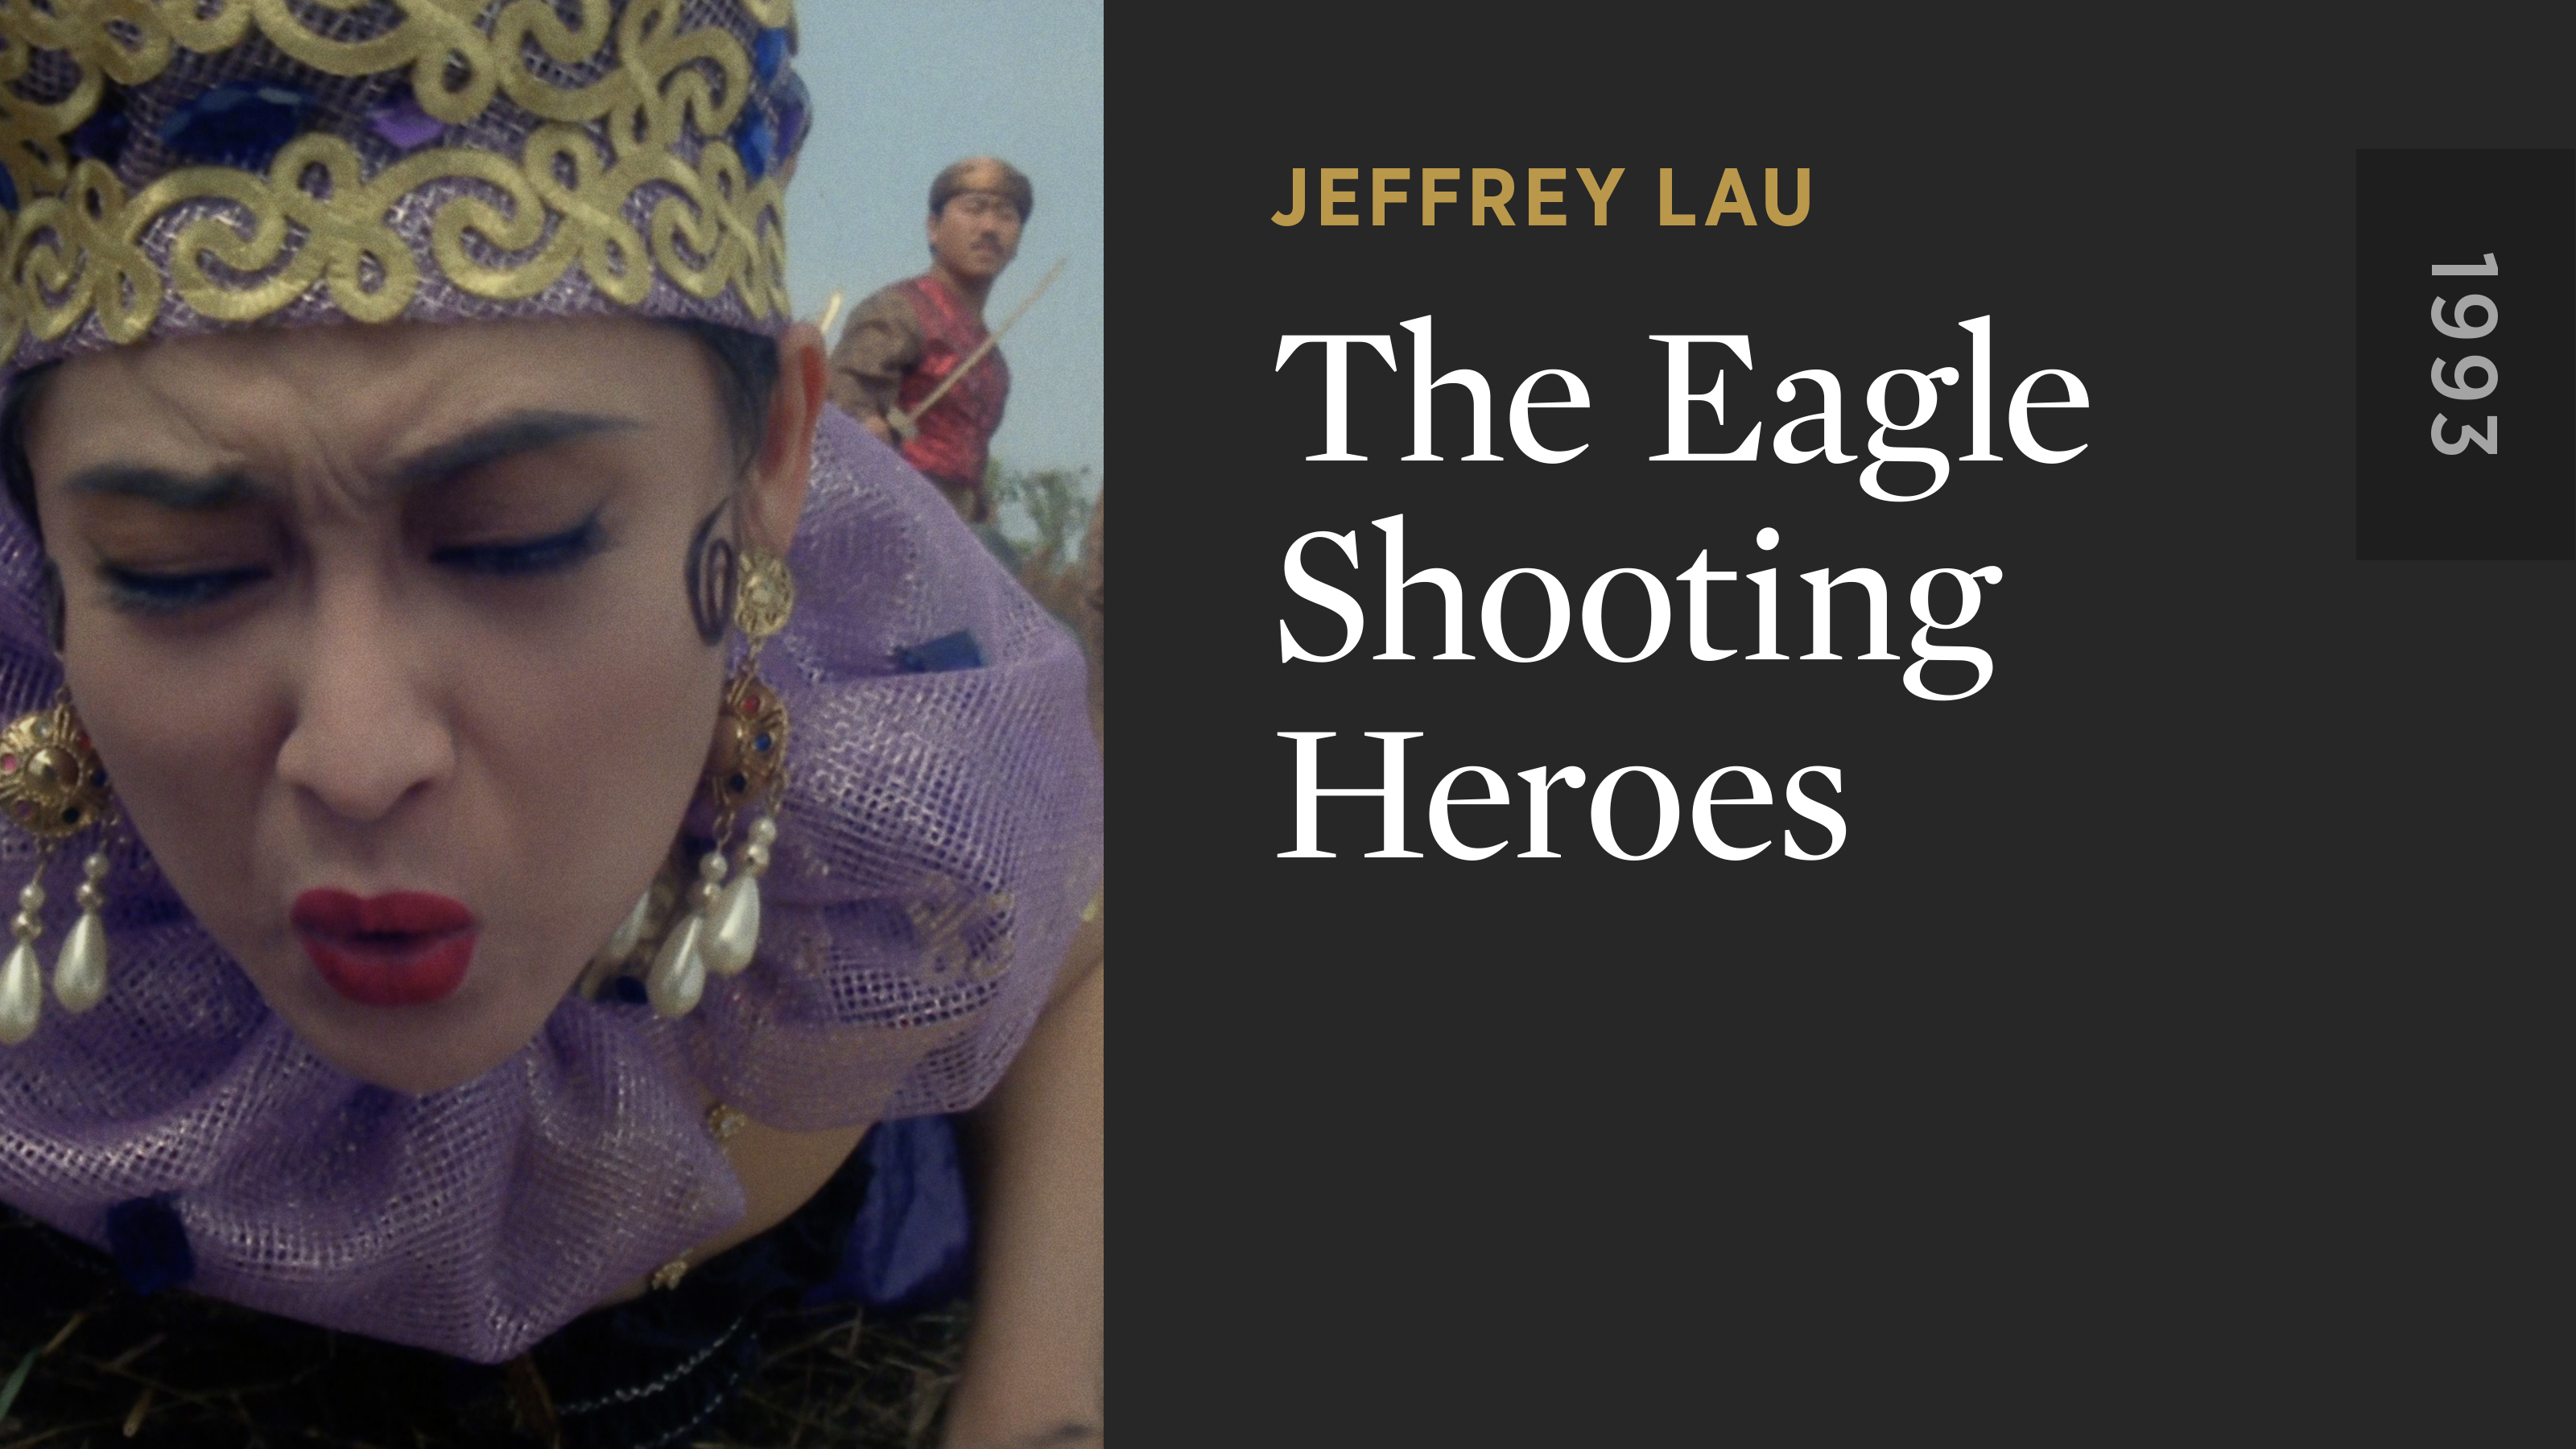 The Eagle Shooting Heroes - The Criterion Channel